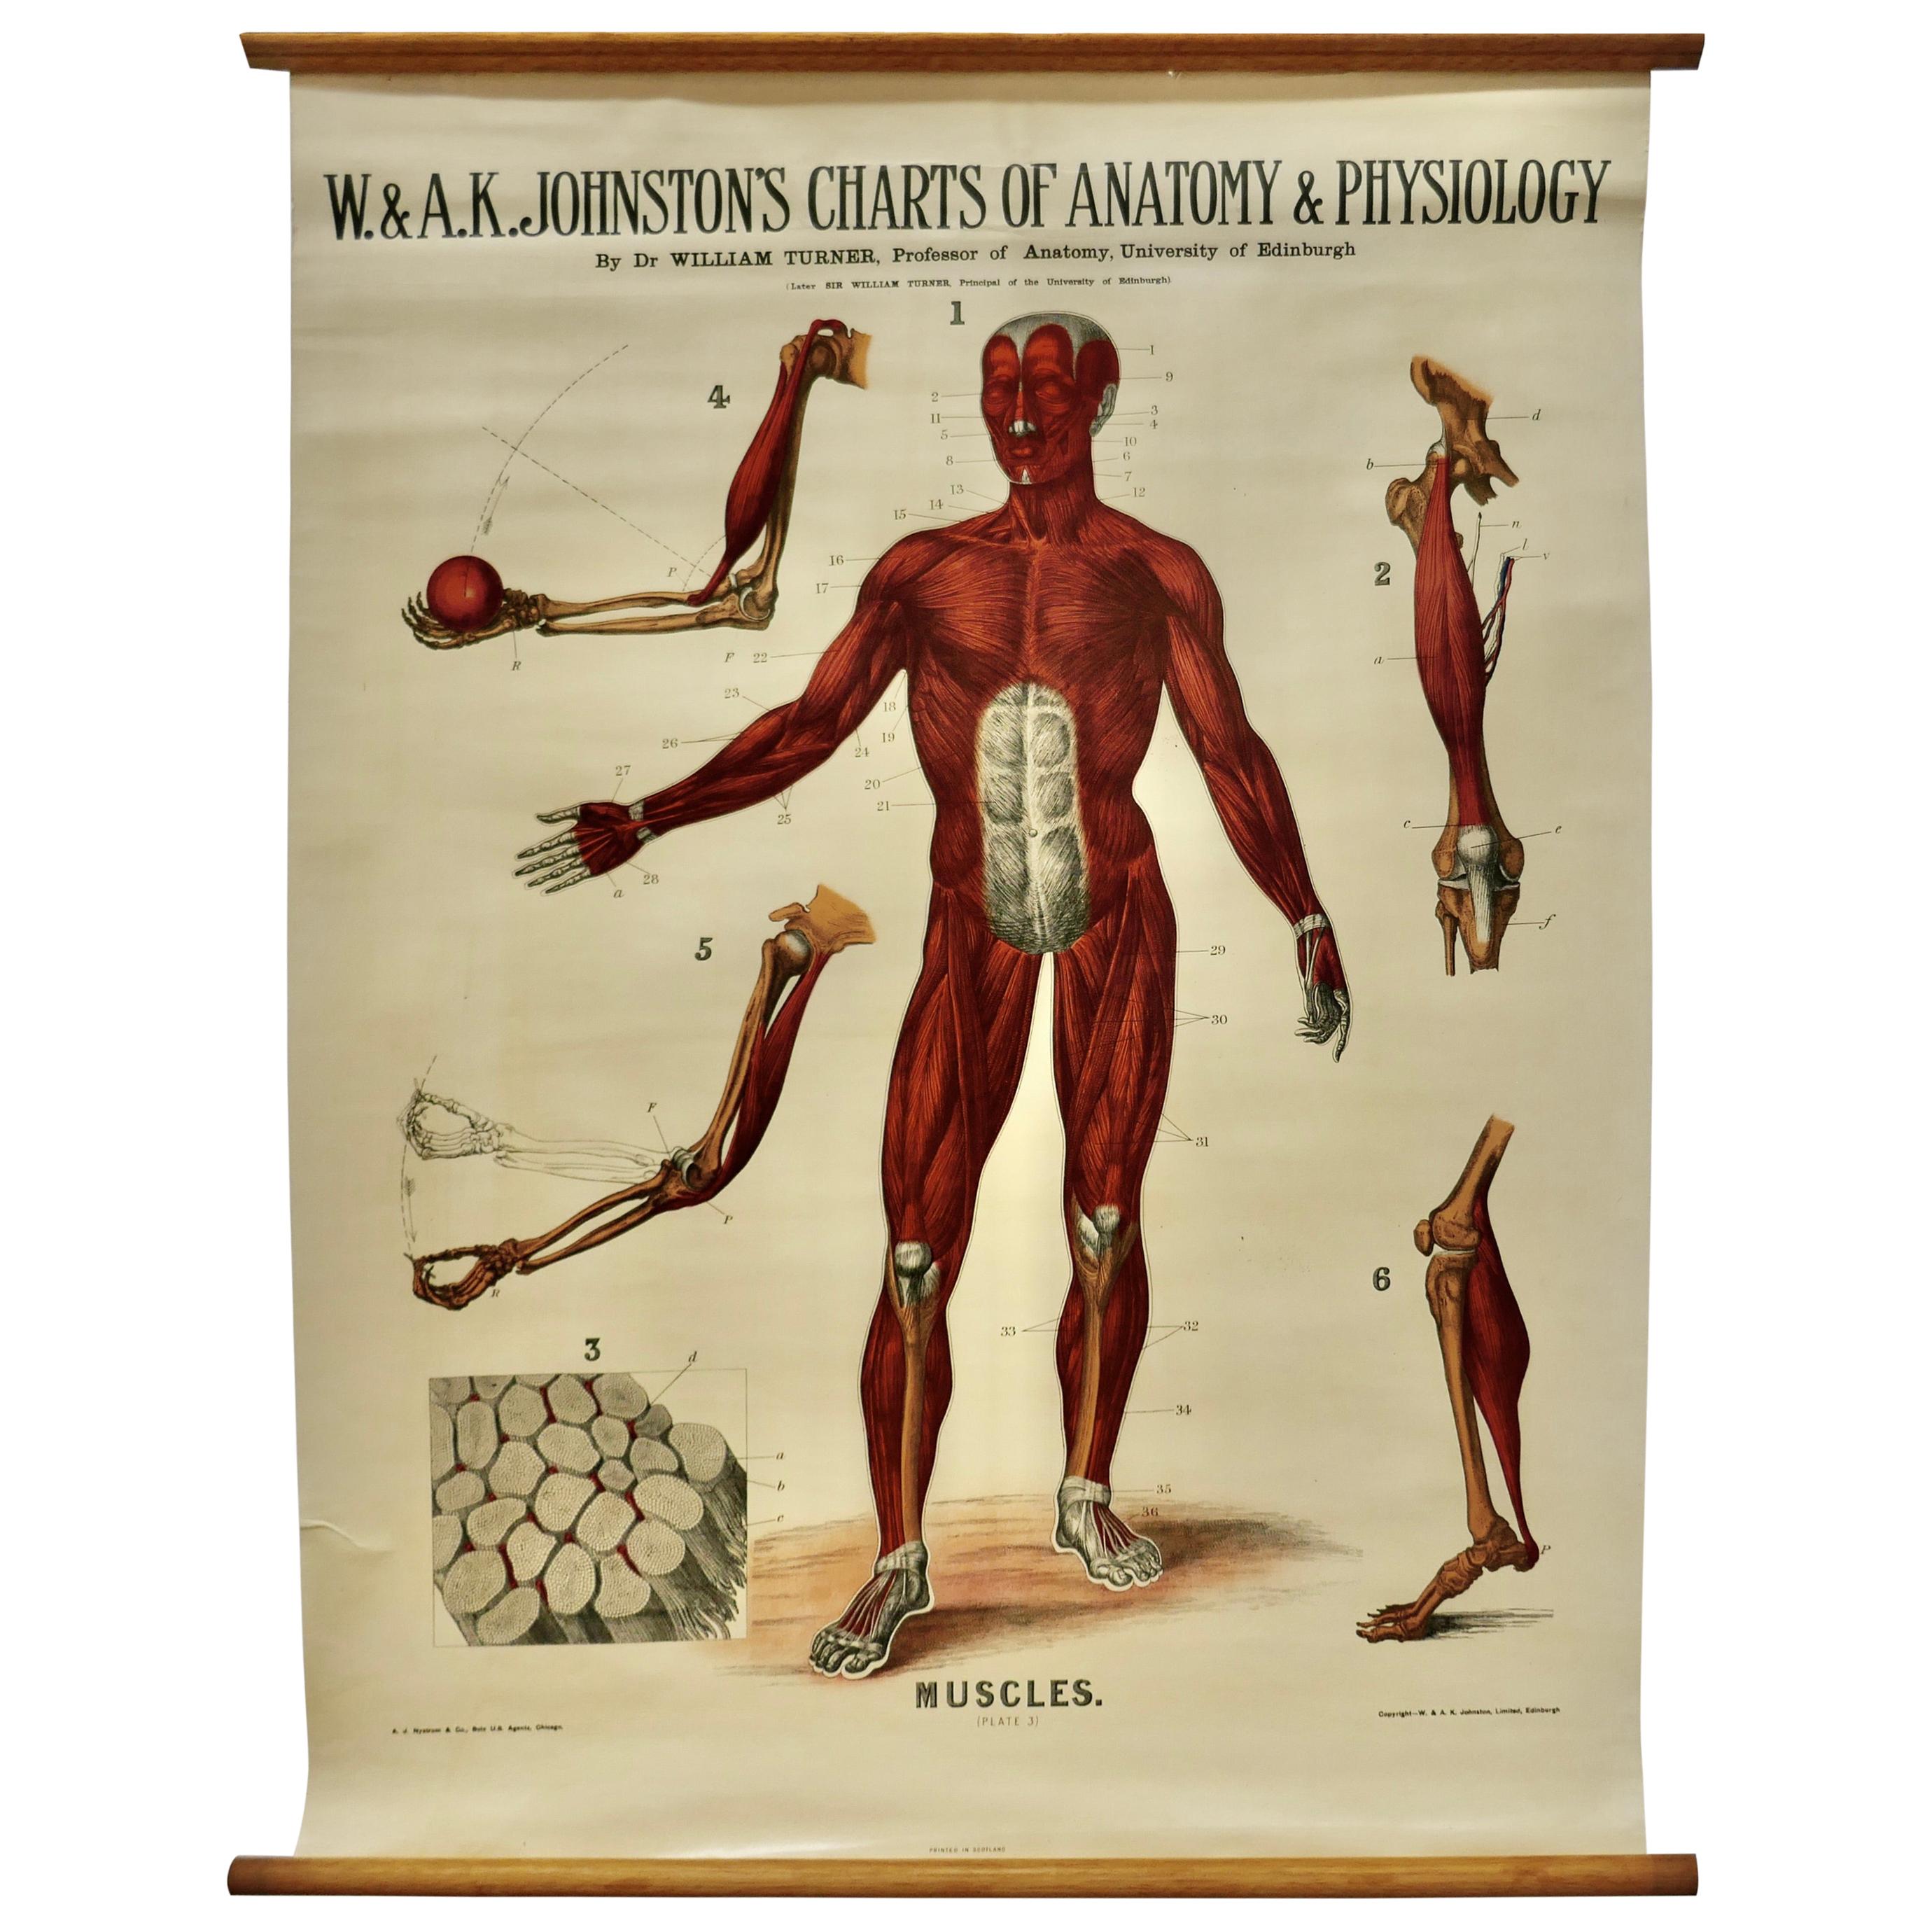 Large University Anatomical Chart “Muscles” by Turner